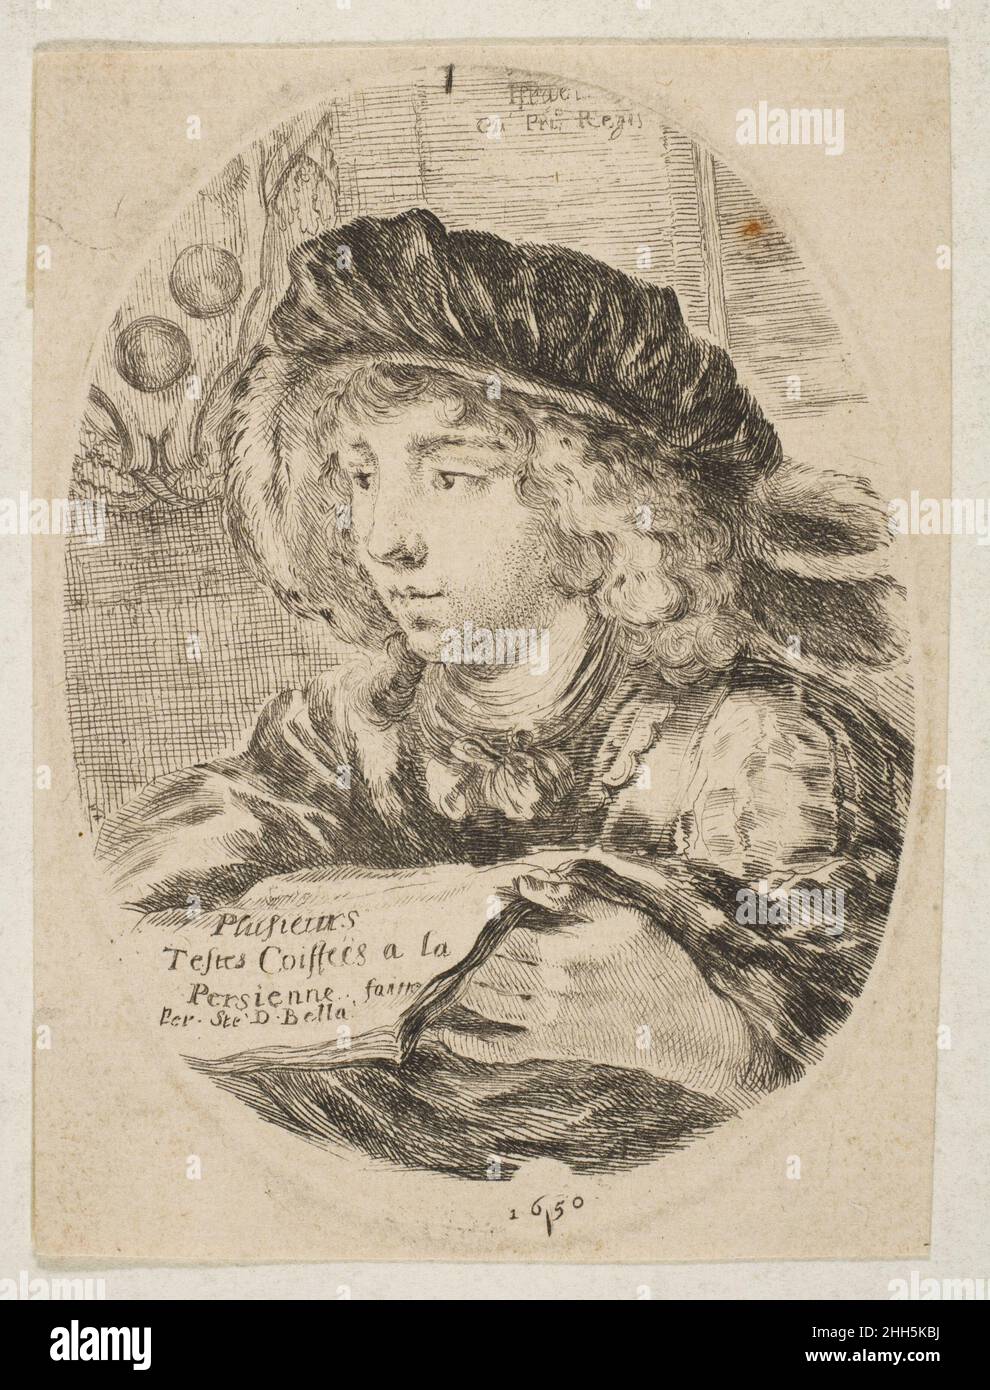 A bust of a young man wearing a cap with feathers, turned three-quarters to the left, the coat of arms of the Grand Duke of Tuscany in top left, title page from 'Several heads in the Persian style' (Plusieurs têtes coiffées à la persienne) 1650 Etched by Stefano della Bella Italian. A bust of a young man wearing a cap with feathers, turned three-quarters to the left, the coat of arms of the Grand Duke of Tuscany in top left, title page from 'Several heads in the Persian style' (Plusieurs têtes coiffées à la persienne)  376393 Stock Photo